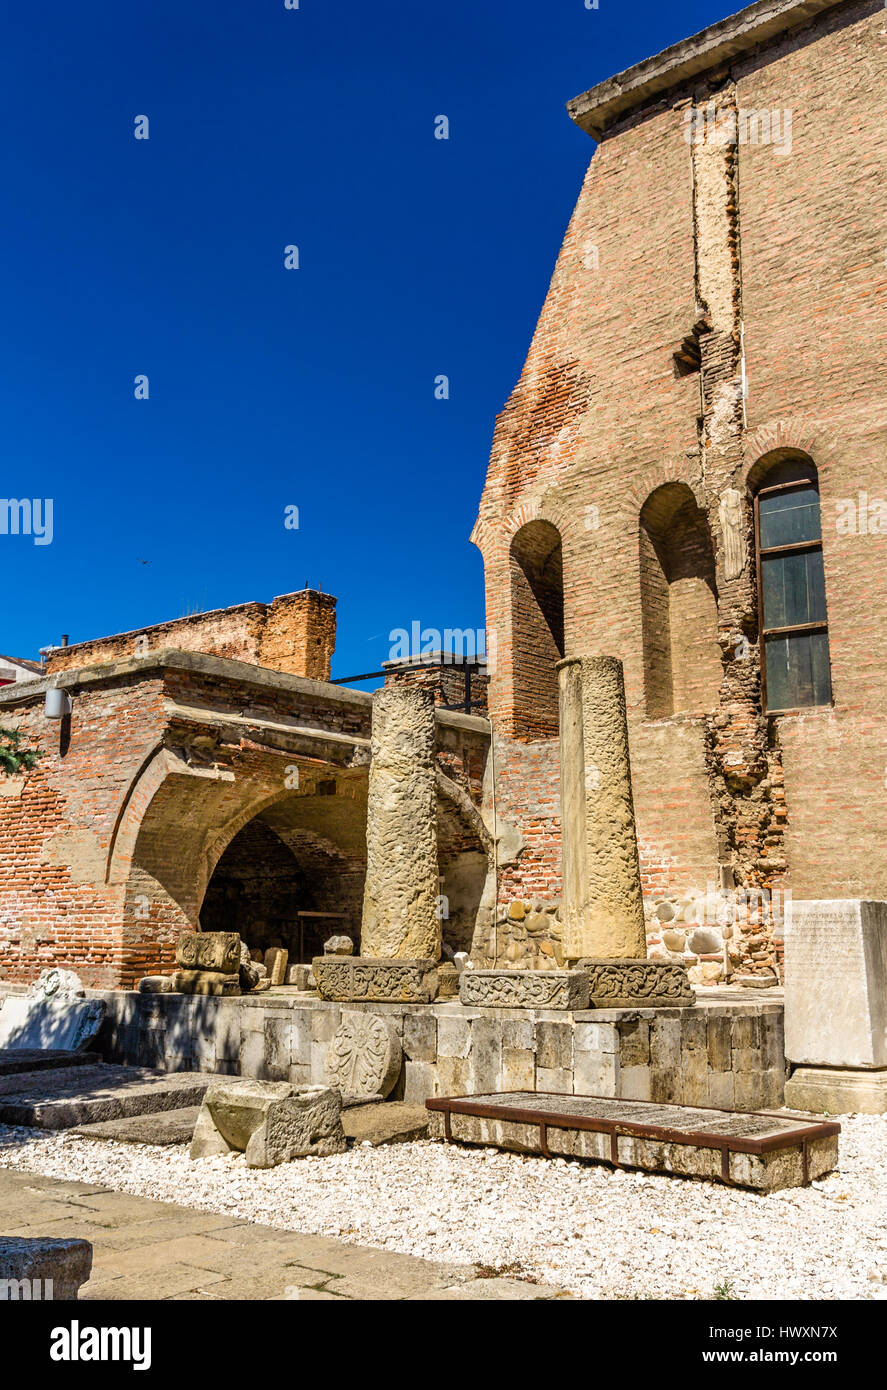 Curtea Veche (the Old Princely Court) in Bucharest, Romania Stock Photo